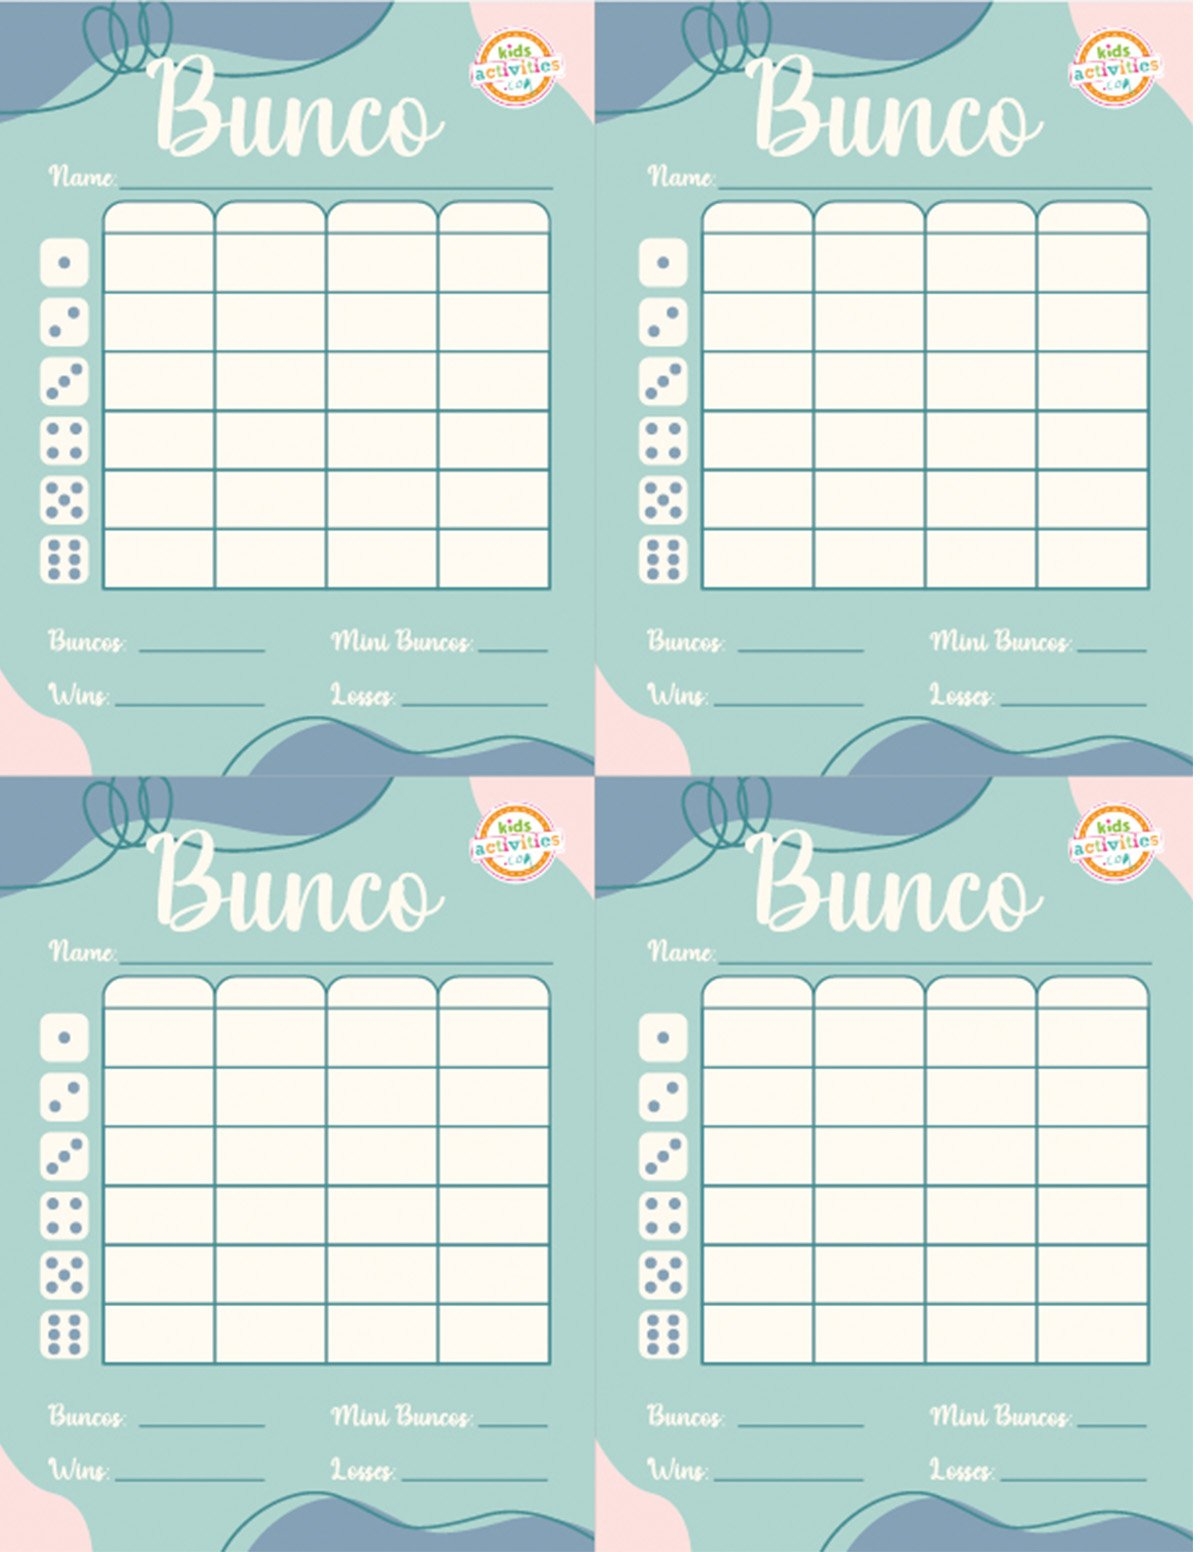 Make A Bunco Party Box With Free Printable Bunco Score Sheets Kids Activities Blog